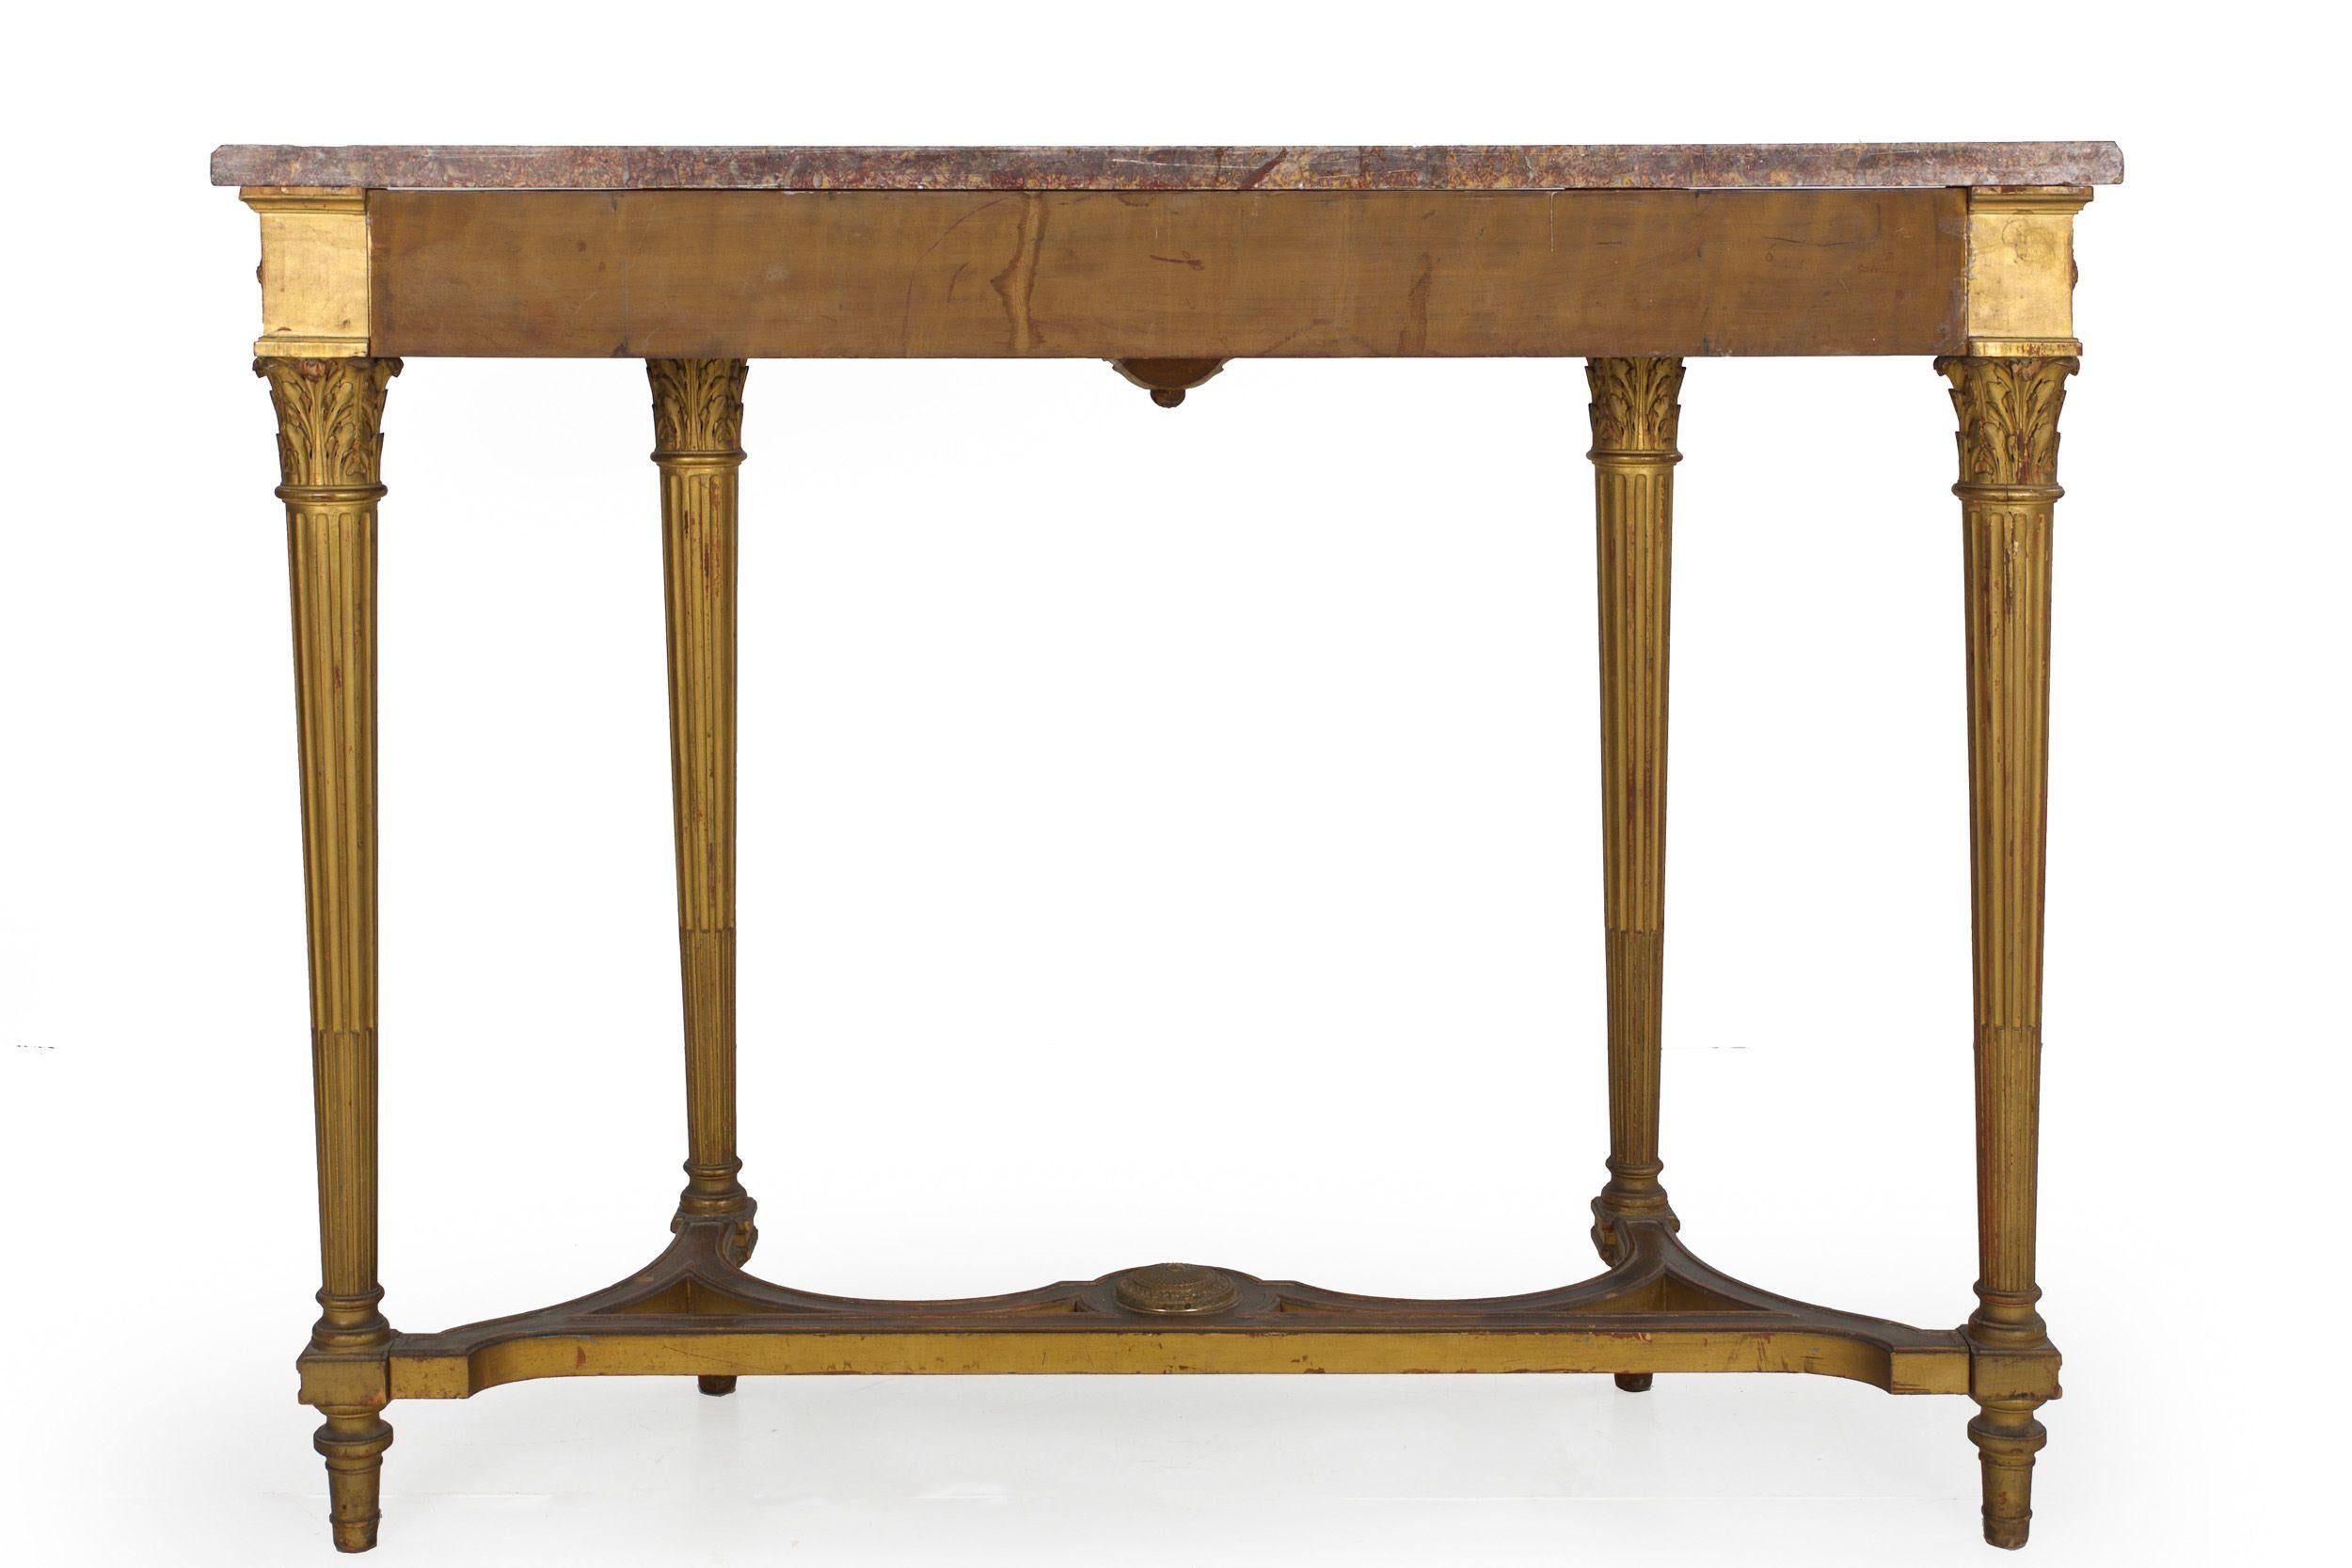 19th Century French Antique Louis XVI Style Giltwood Pier Table Console In Good Condition For Sale In Shippensburg, PA